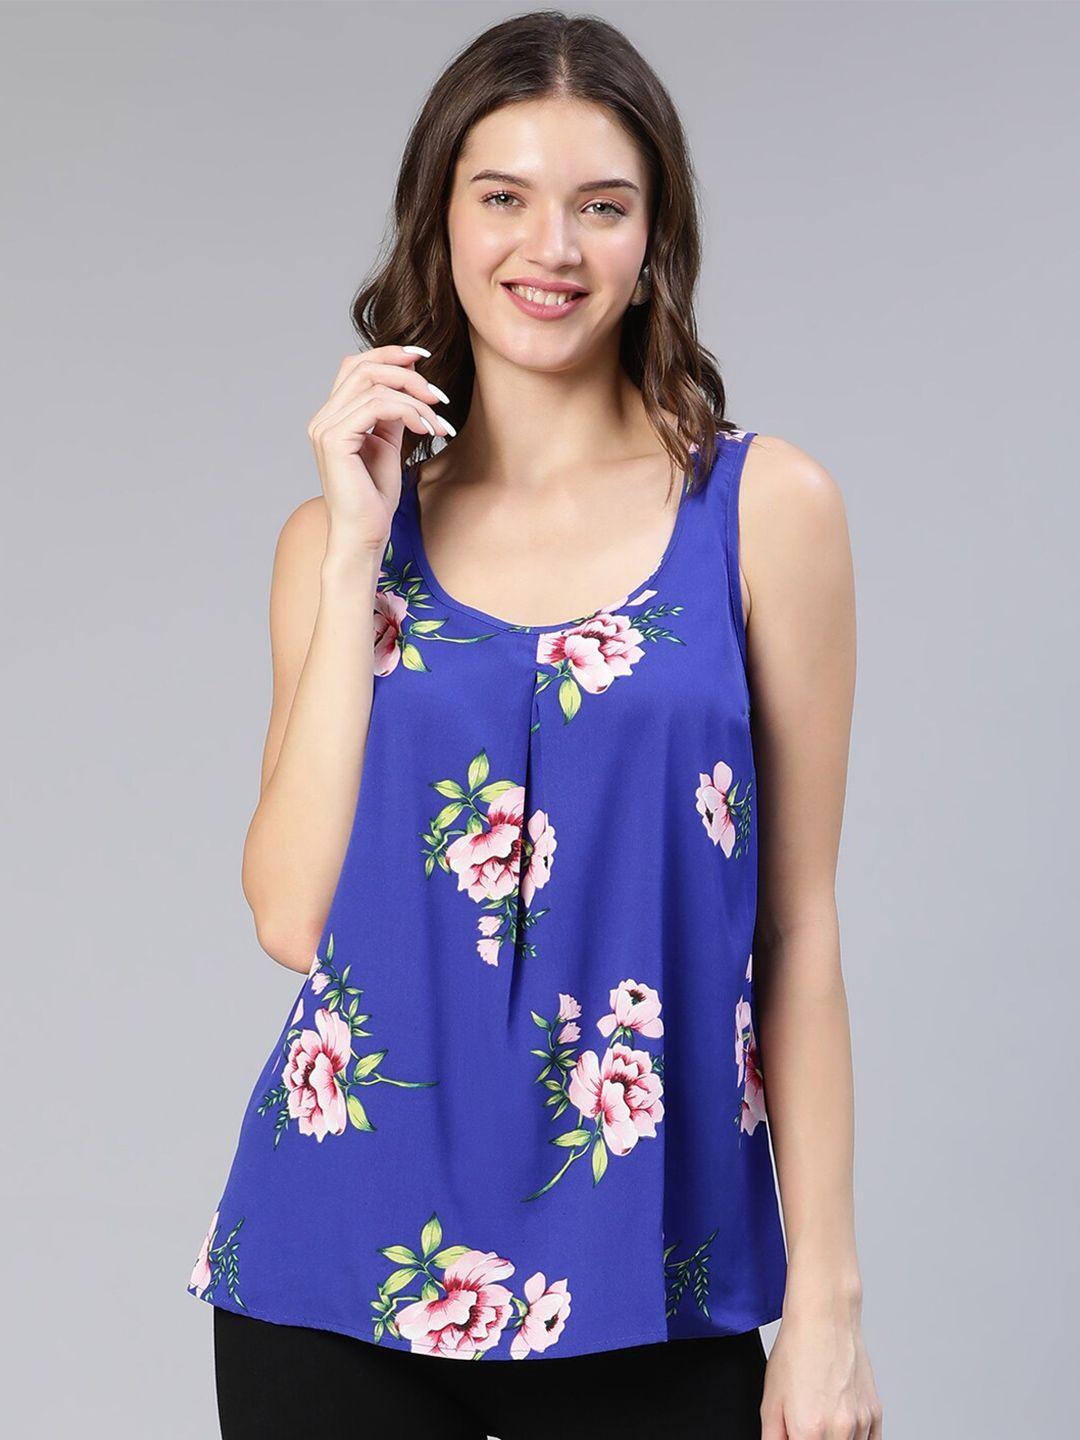 oxolloxo-floral-print-sleeveless-scoop-neck-top